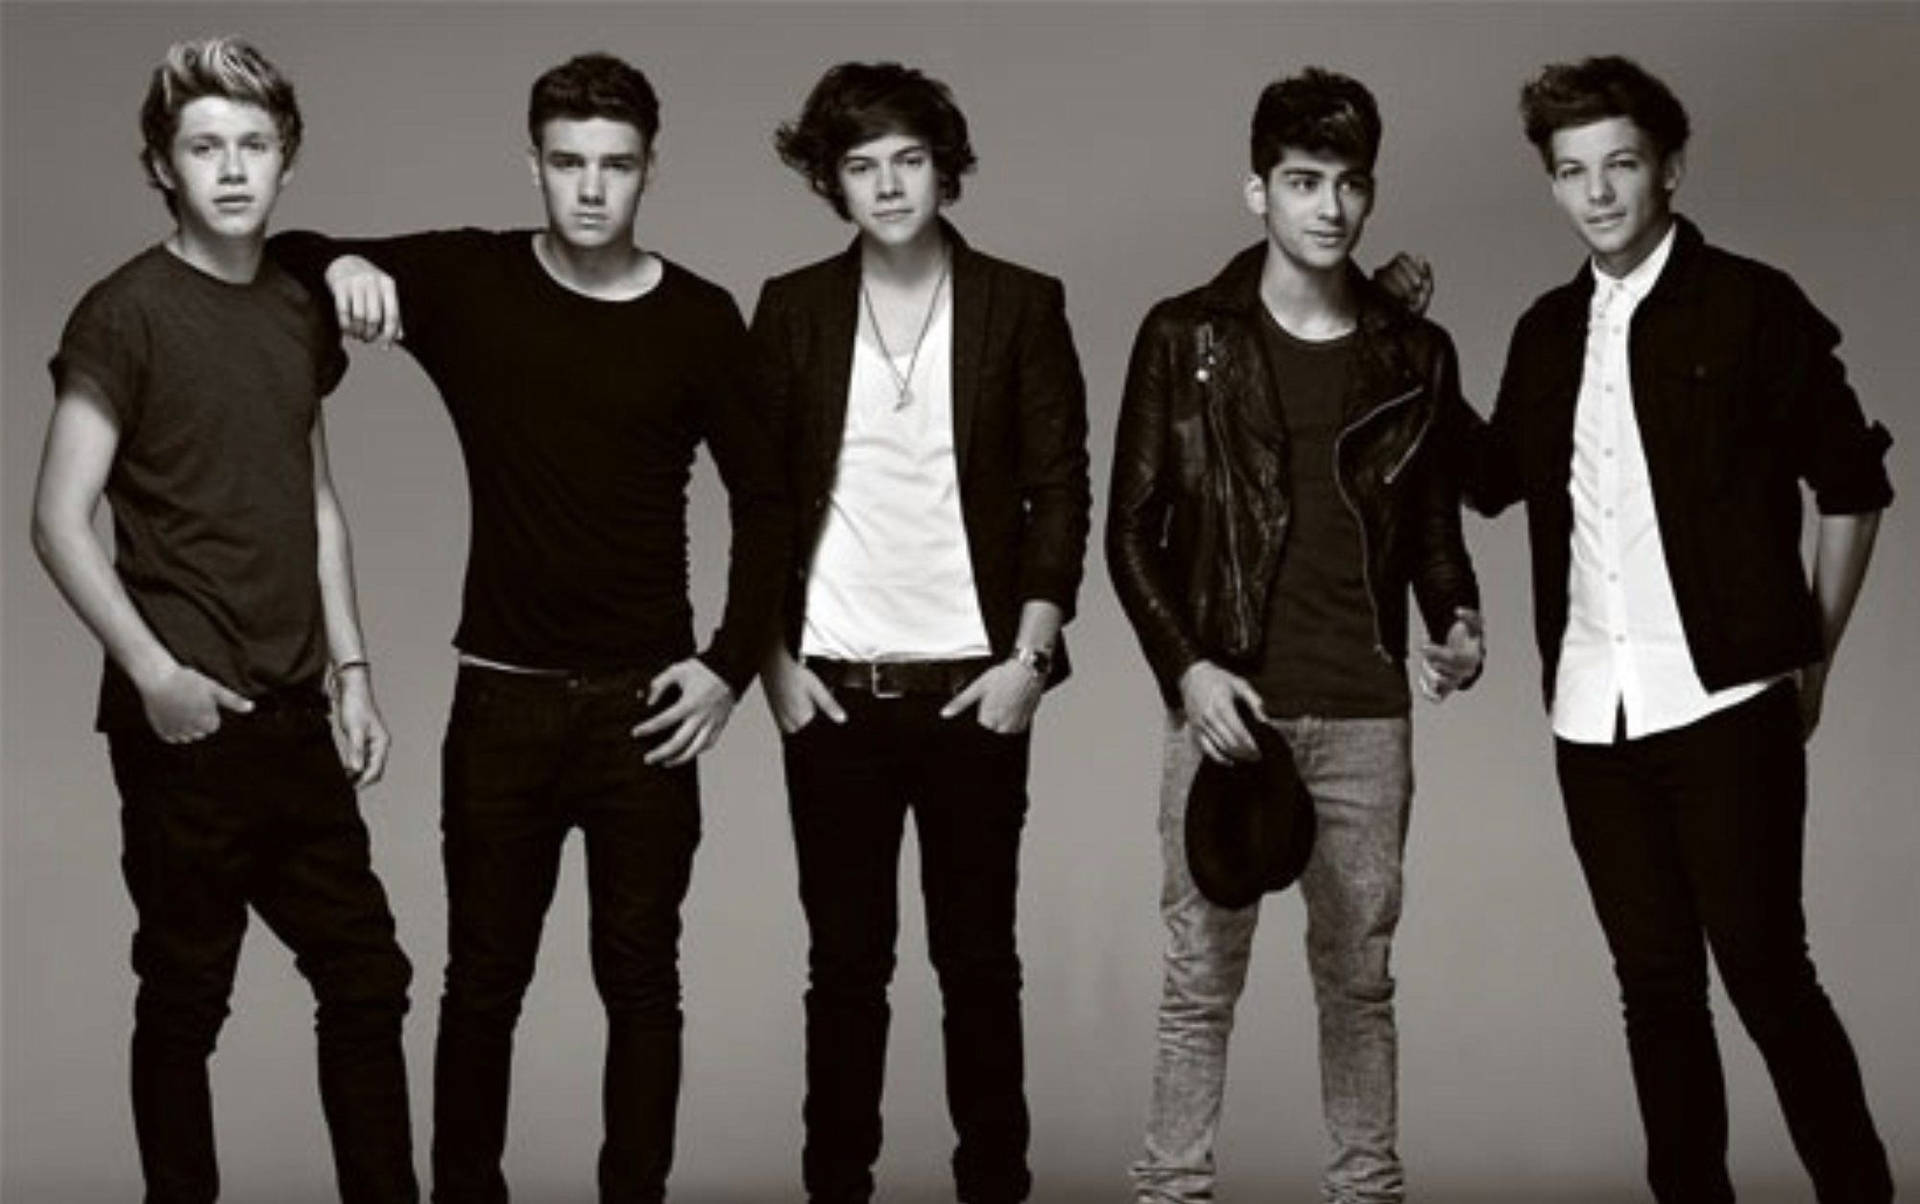 The Boys of One Direction Pose for a Charming Black and White Photo Wallpaper